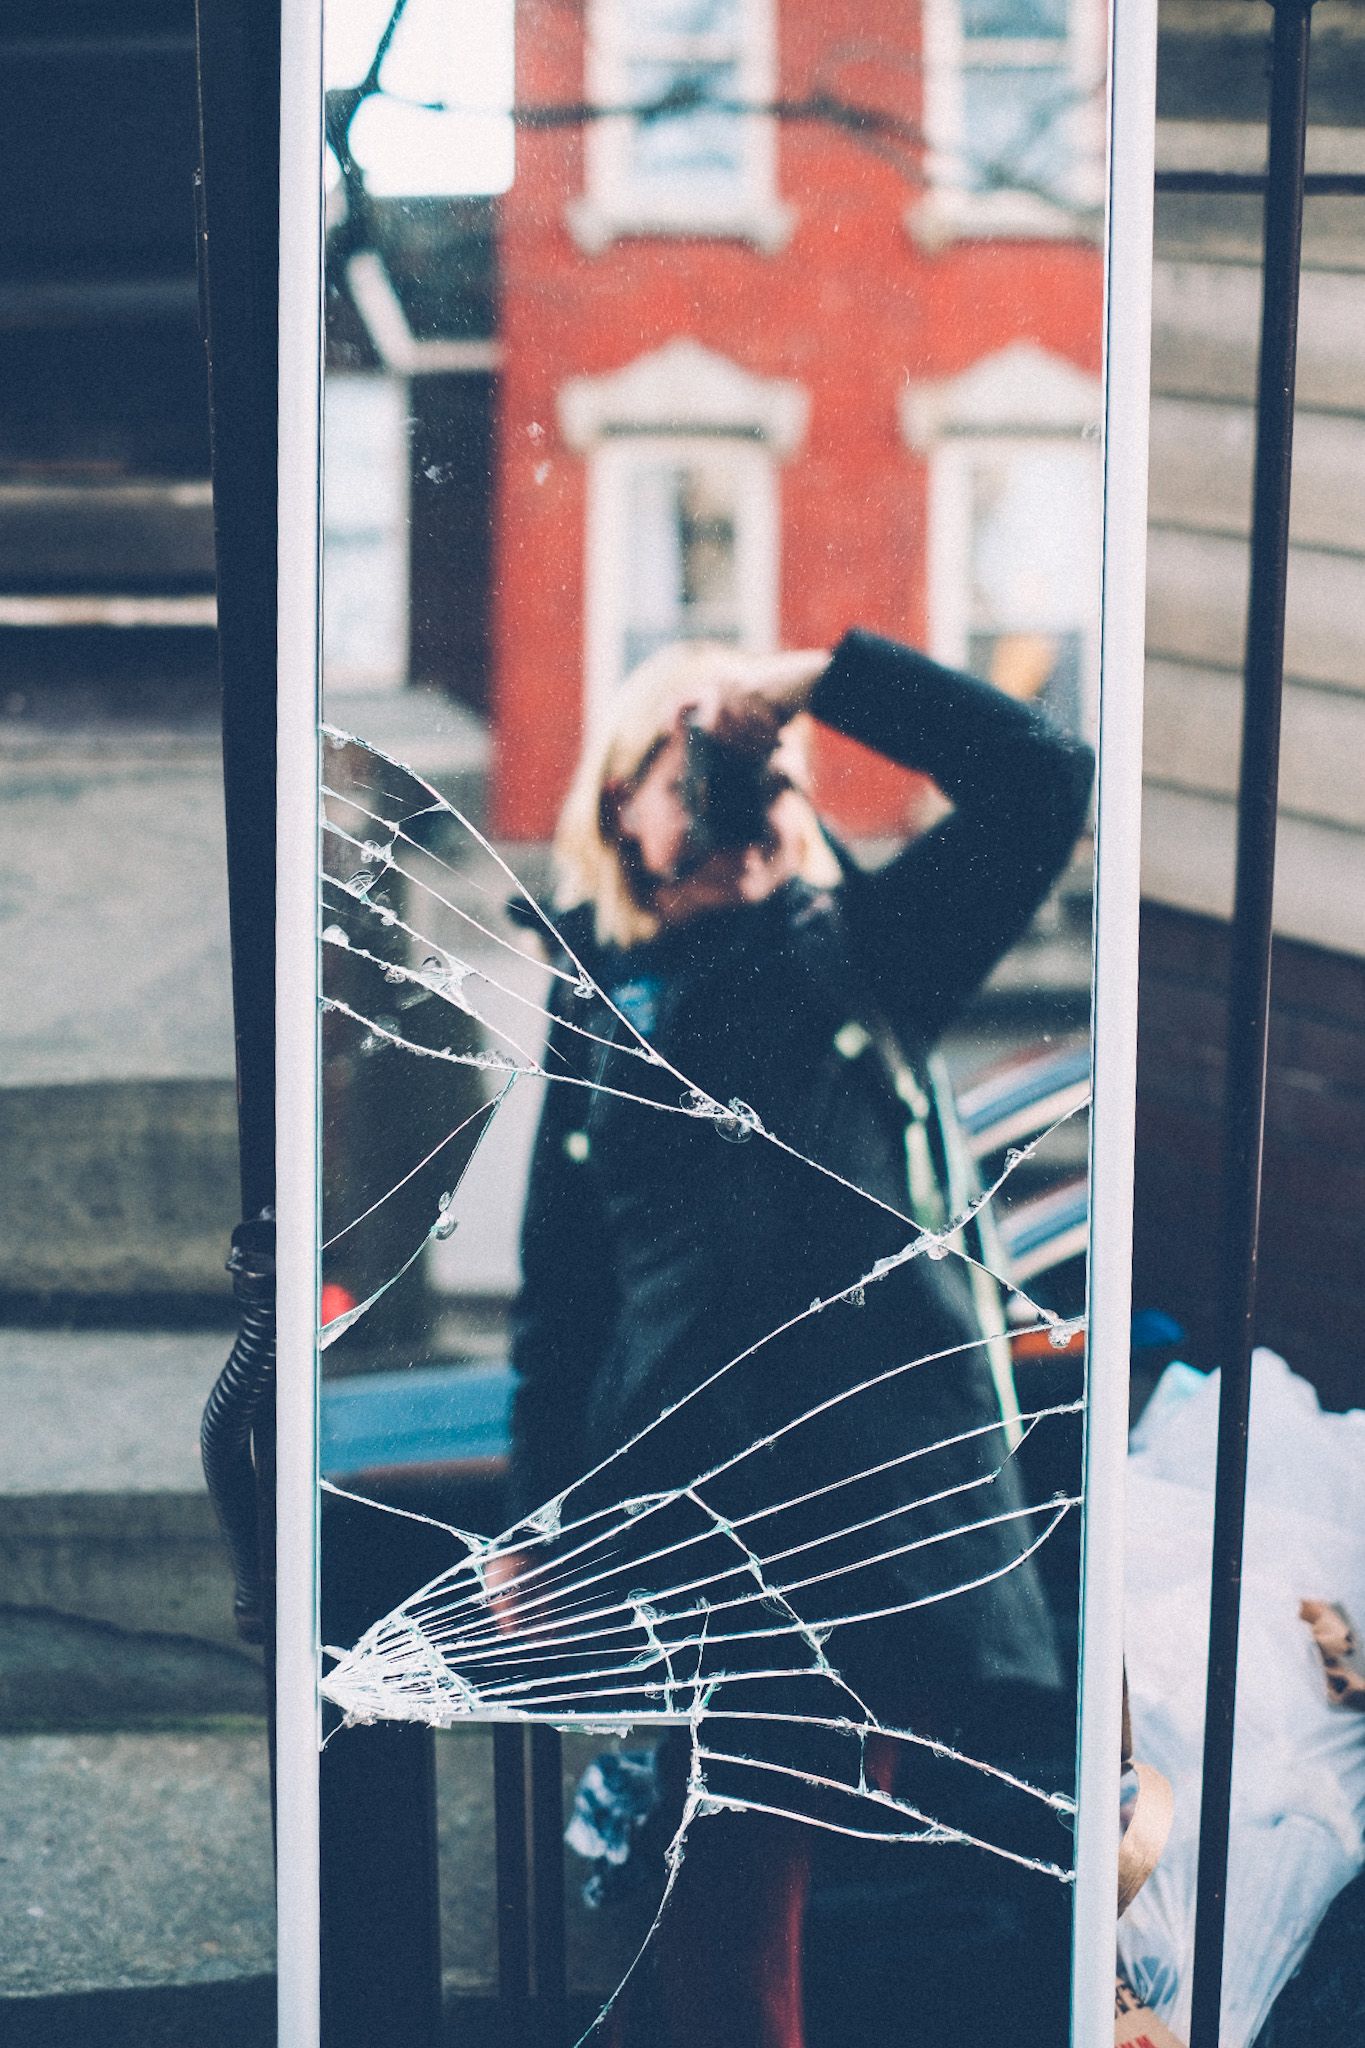 A self-portrait taken in a cracked mirror on a sidewalk, a red brick building in the reflection’s background.